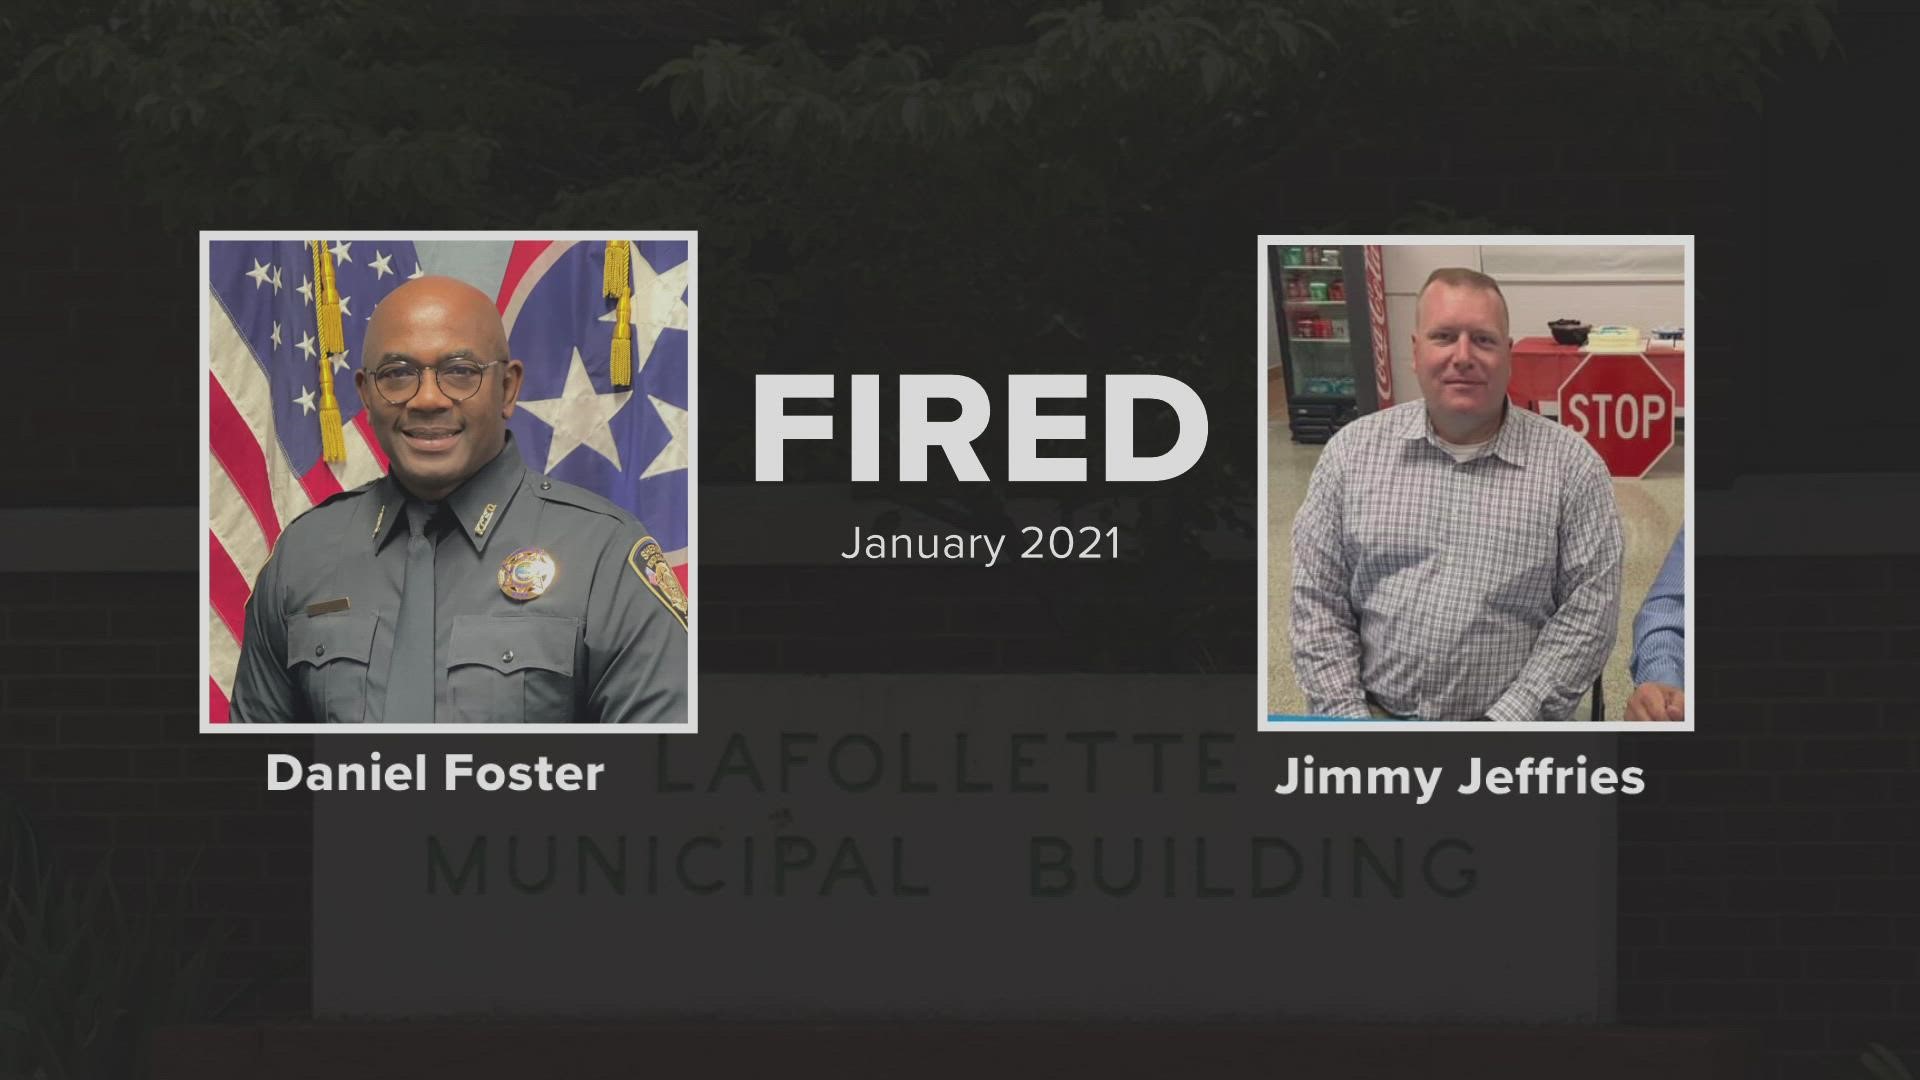 The City Council fired Daniel Foster and Jimmy Jeffries at a meeting in January 2021. Both threatened to sue, and the city settled.